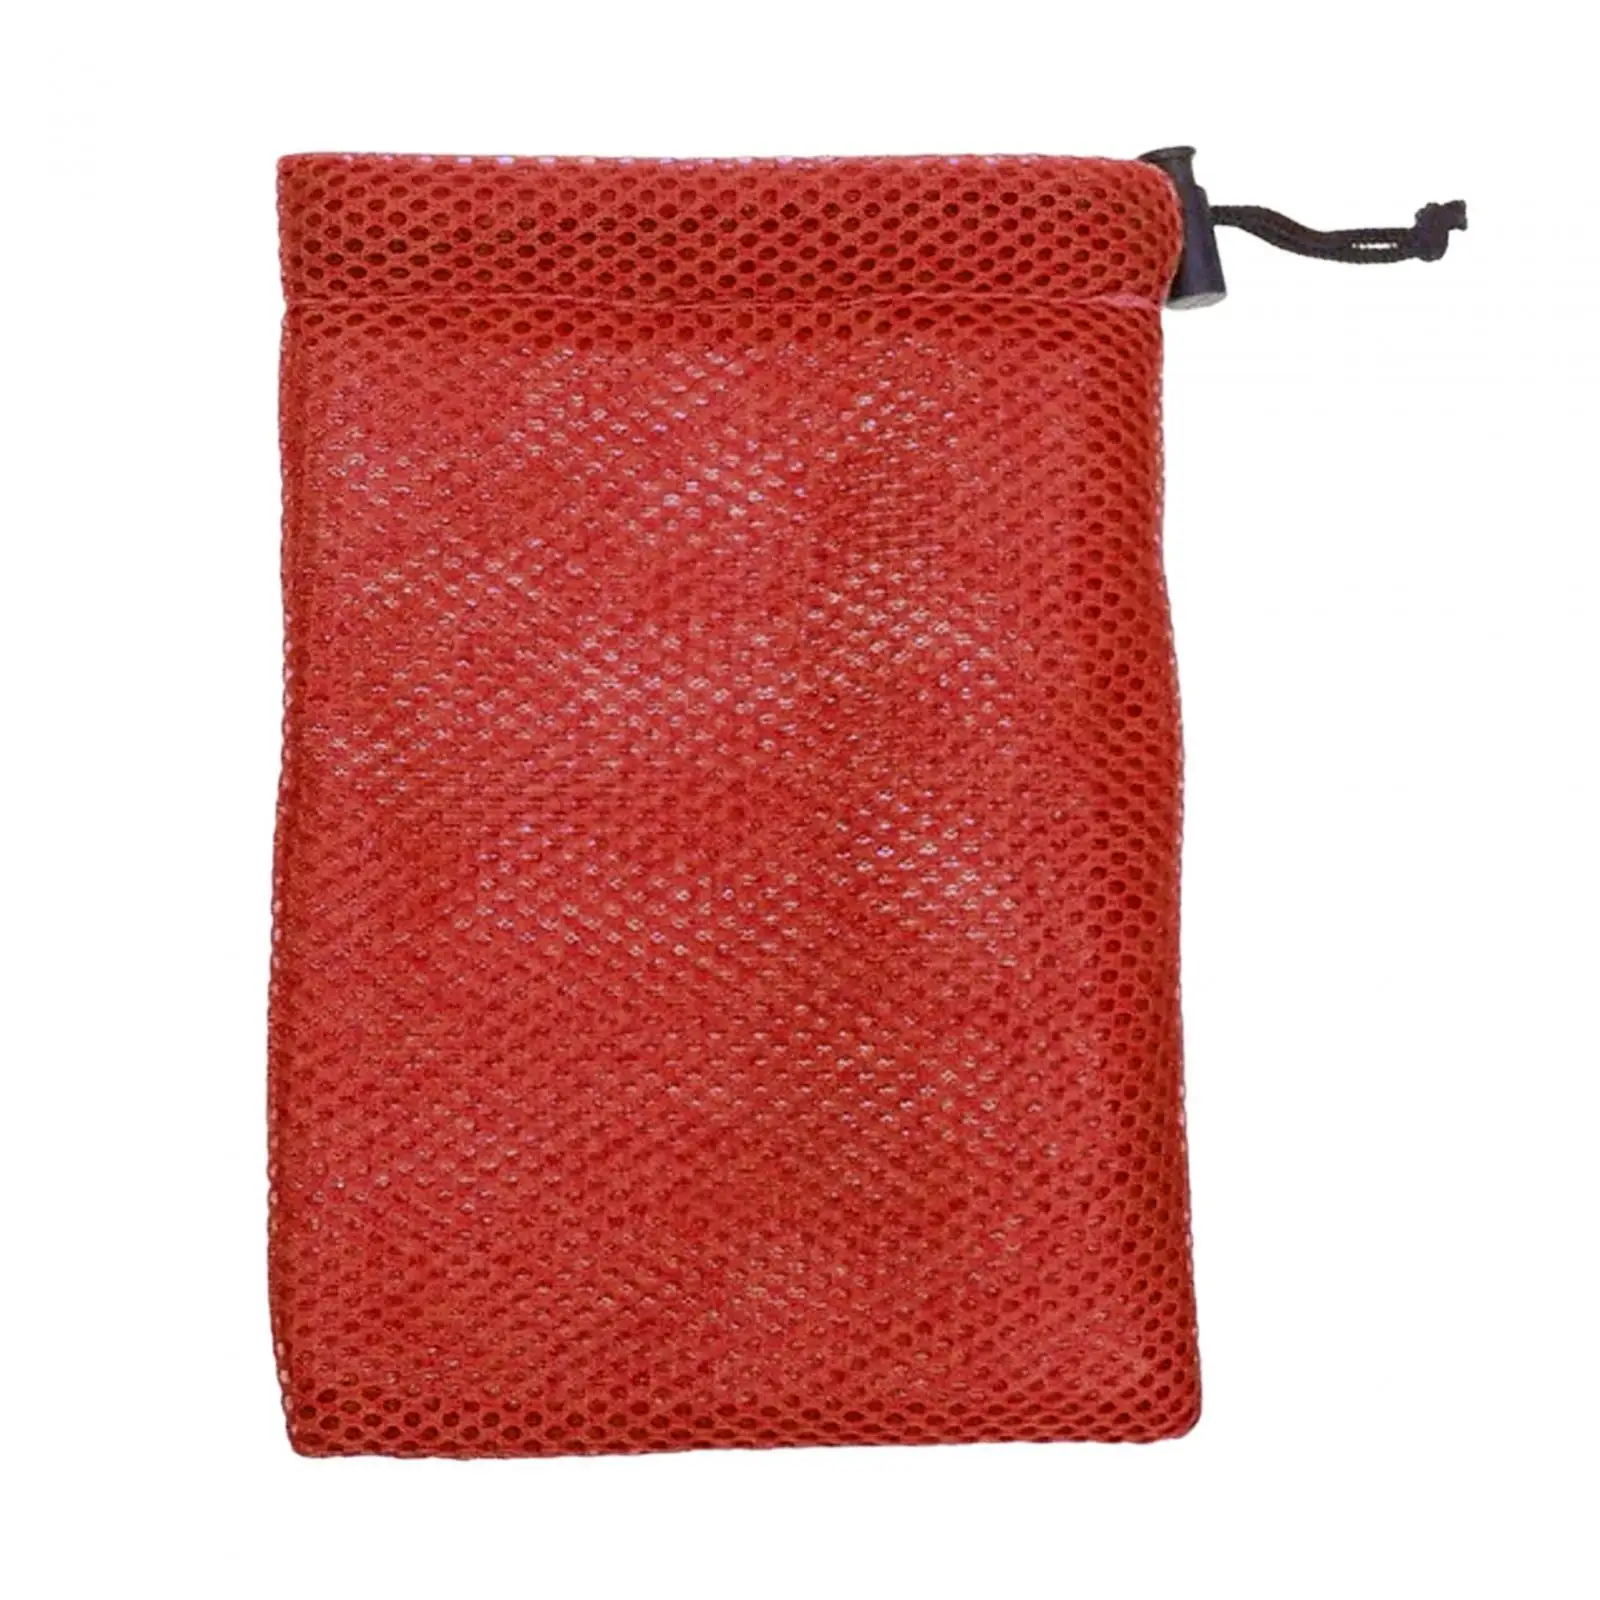 Small Mesh Drawstring Bag Stuff Sack Multipurpose Durable Storage Pouch Mesh Bag for Cosmetics, Collecting Toys, Golf Balls